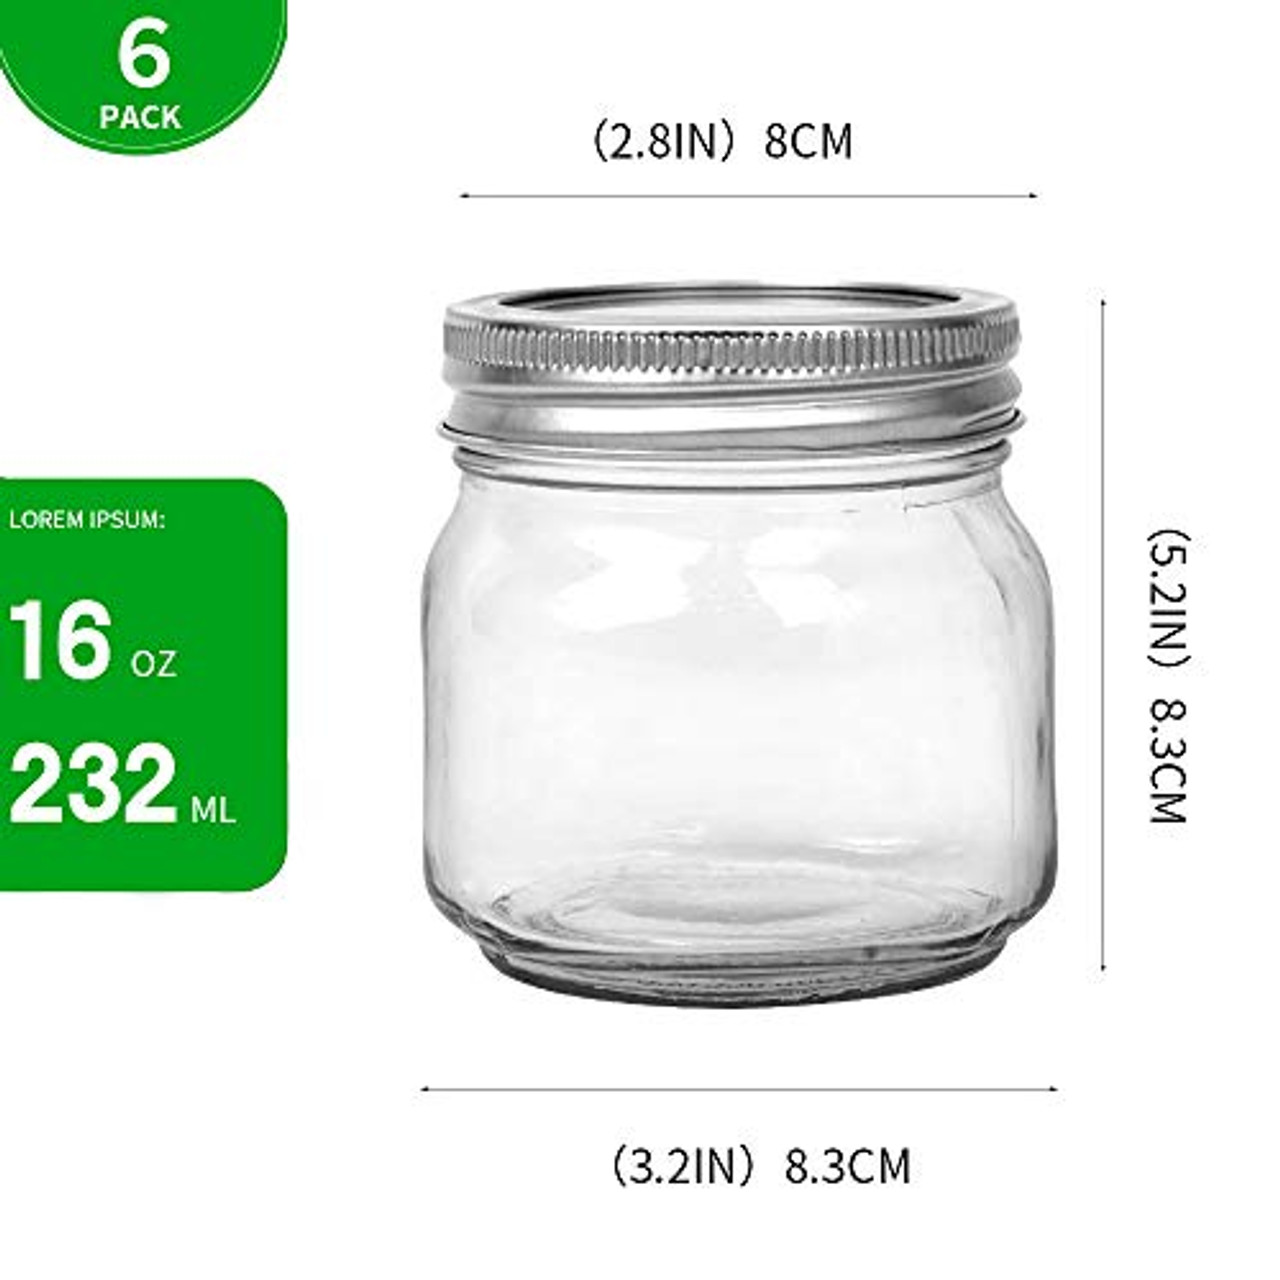 Newest Superb Version]EAXCK 8 oz Mason Jars with Lids and Bands 6 PACK,Wide  Mouth